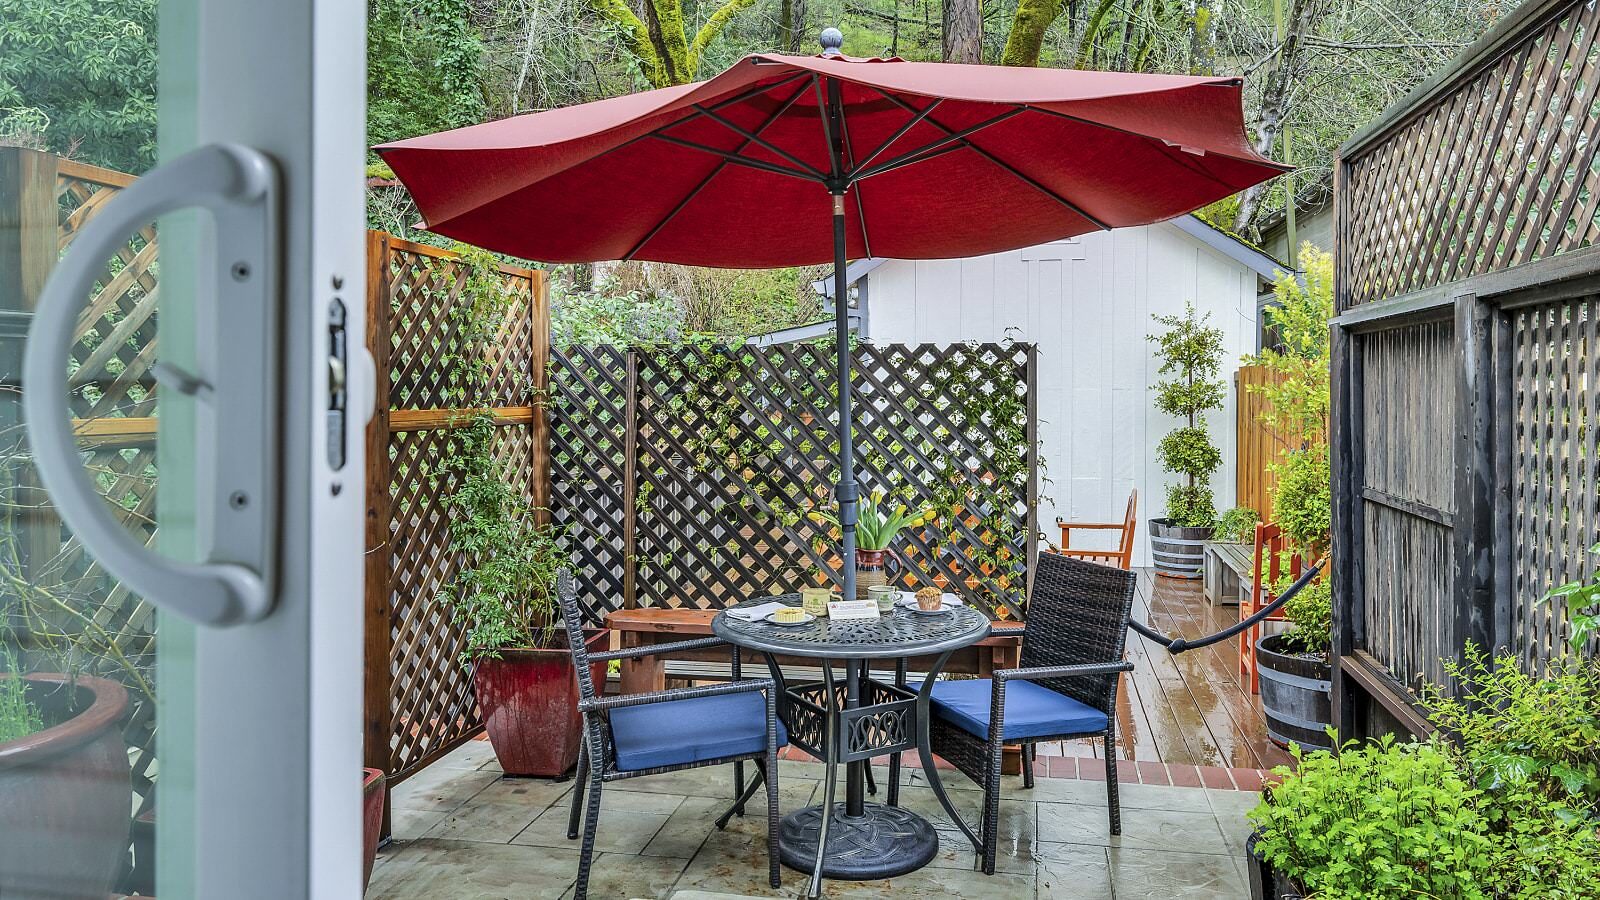 Back patio with metal patio dining table, dark wicker patio dining chairs, and red umbrella